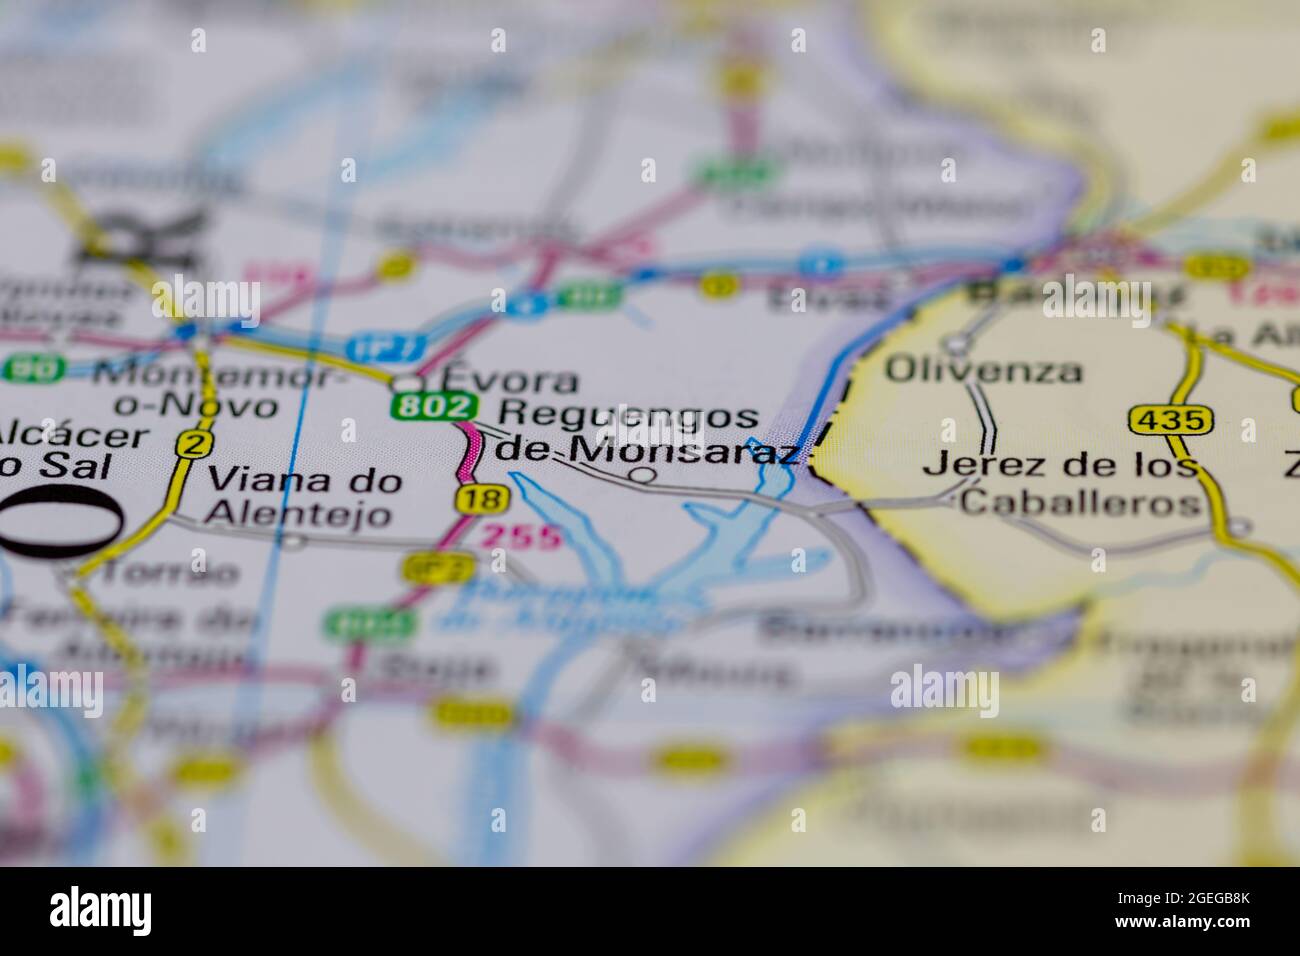 Reguengos de Monsaraz Portugal shown on a road map or Geography map Stock Photo